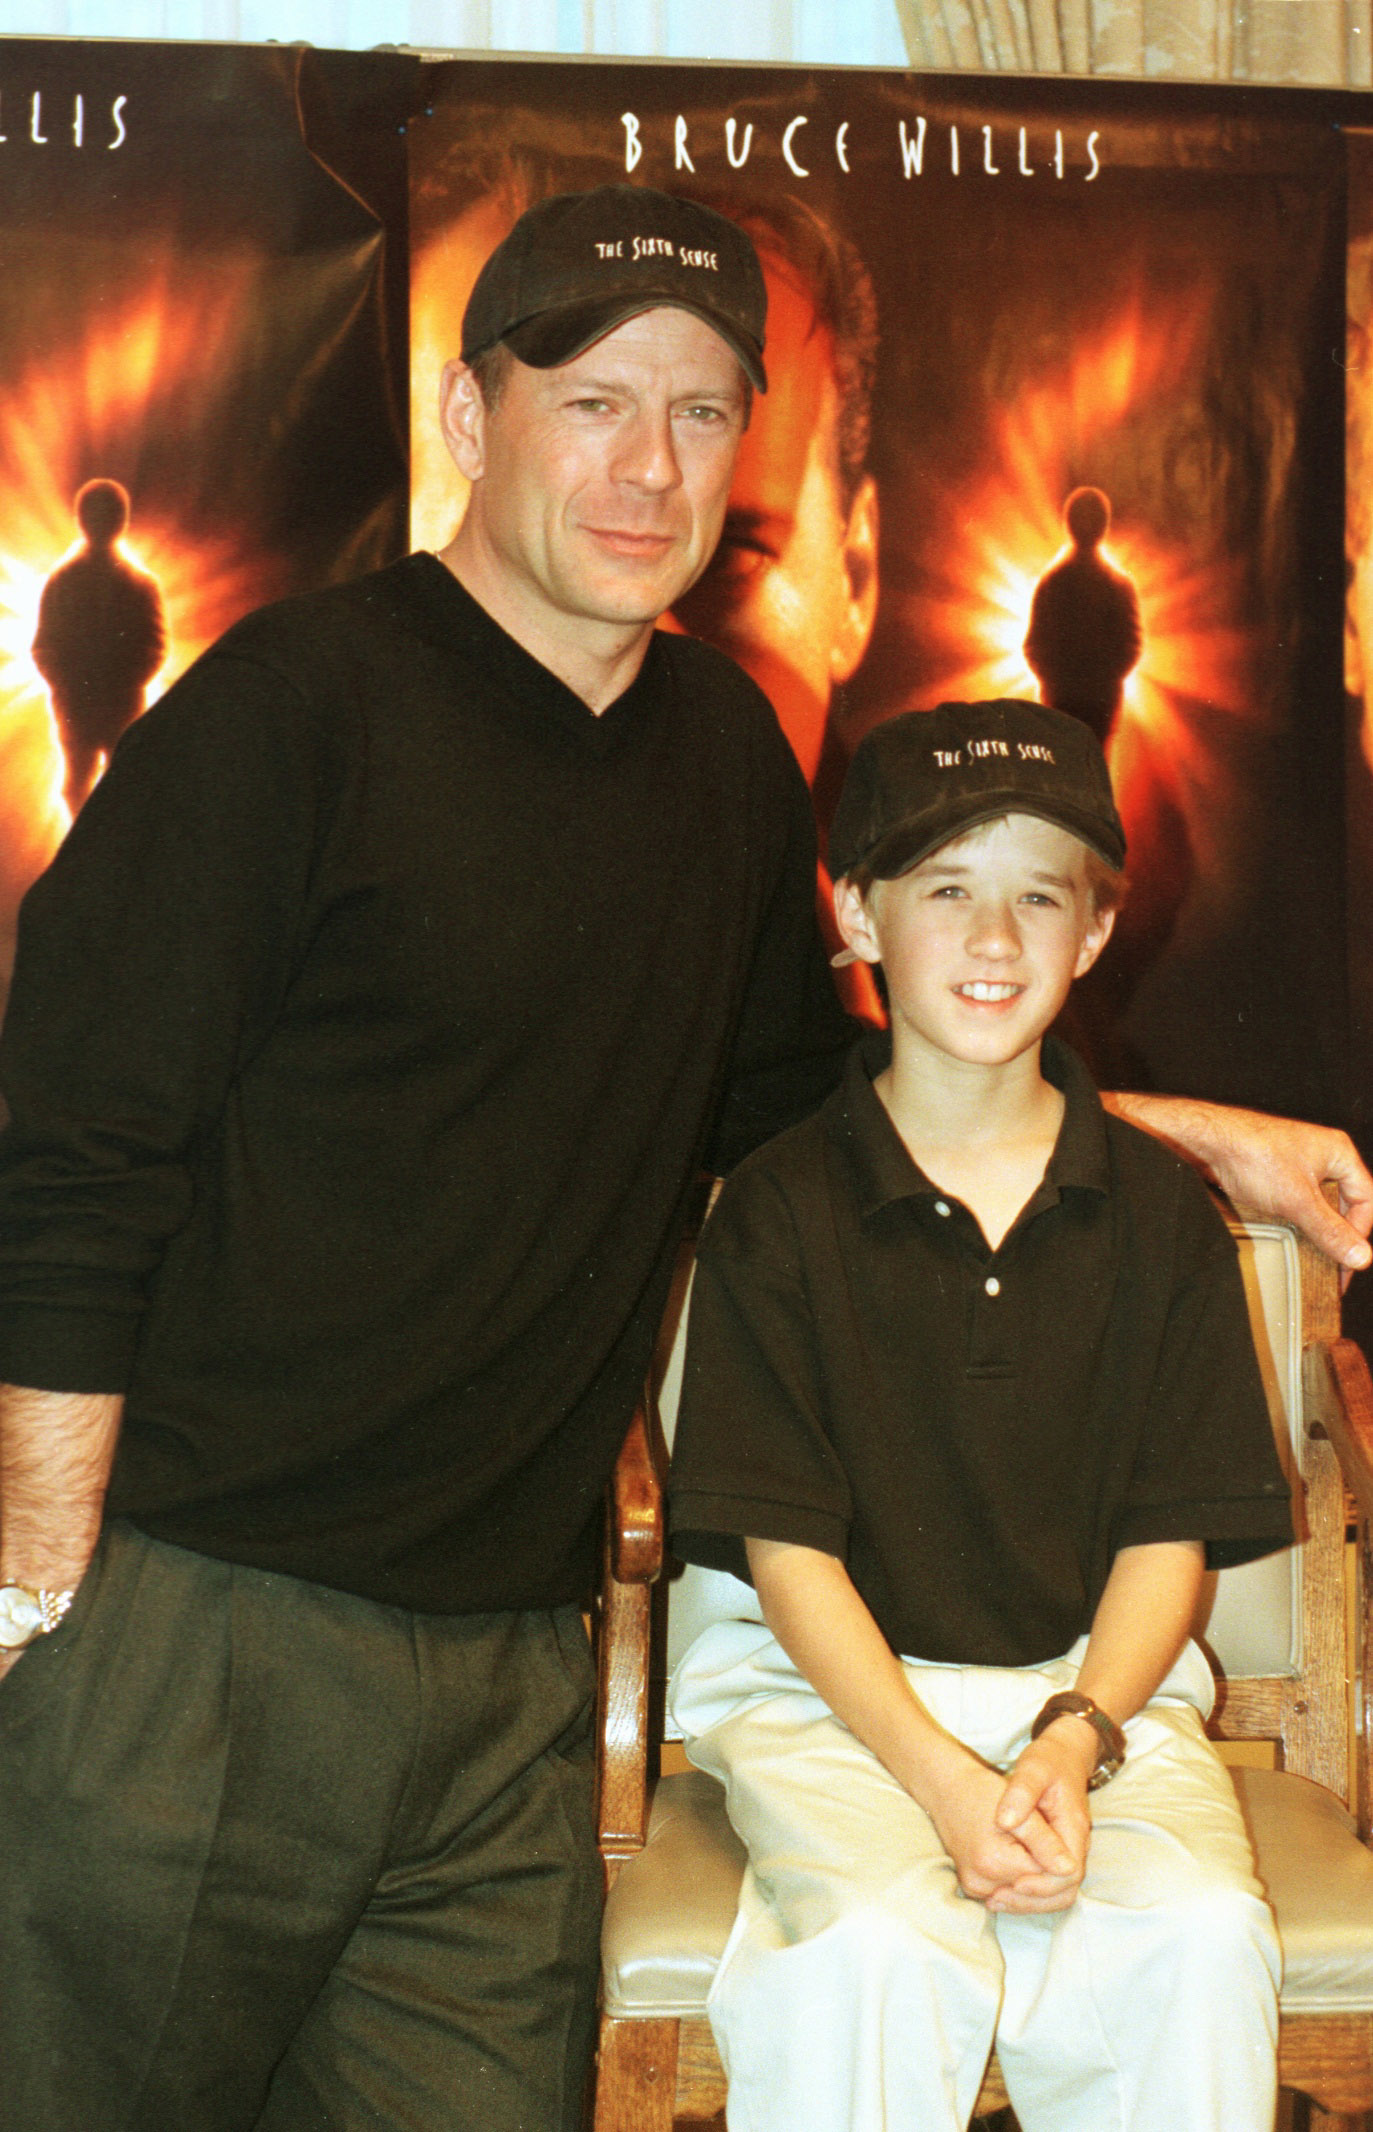 Bruce Willis and Haley Osment at the preview of the film "The Sixth Sense," on December 8, 1999 | Source: Getty Images